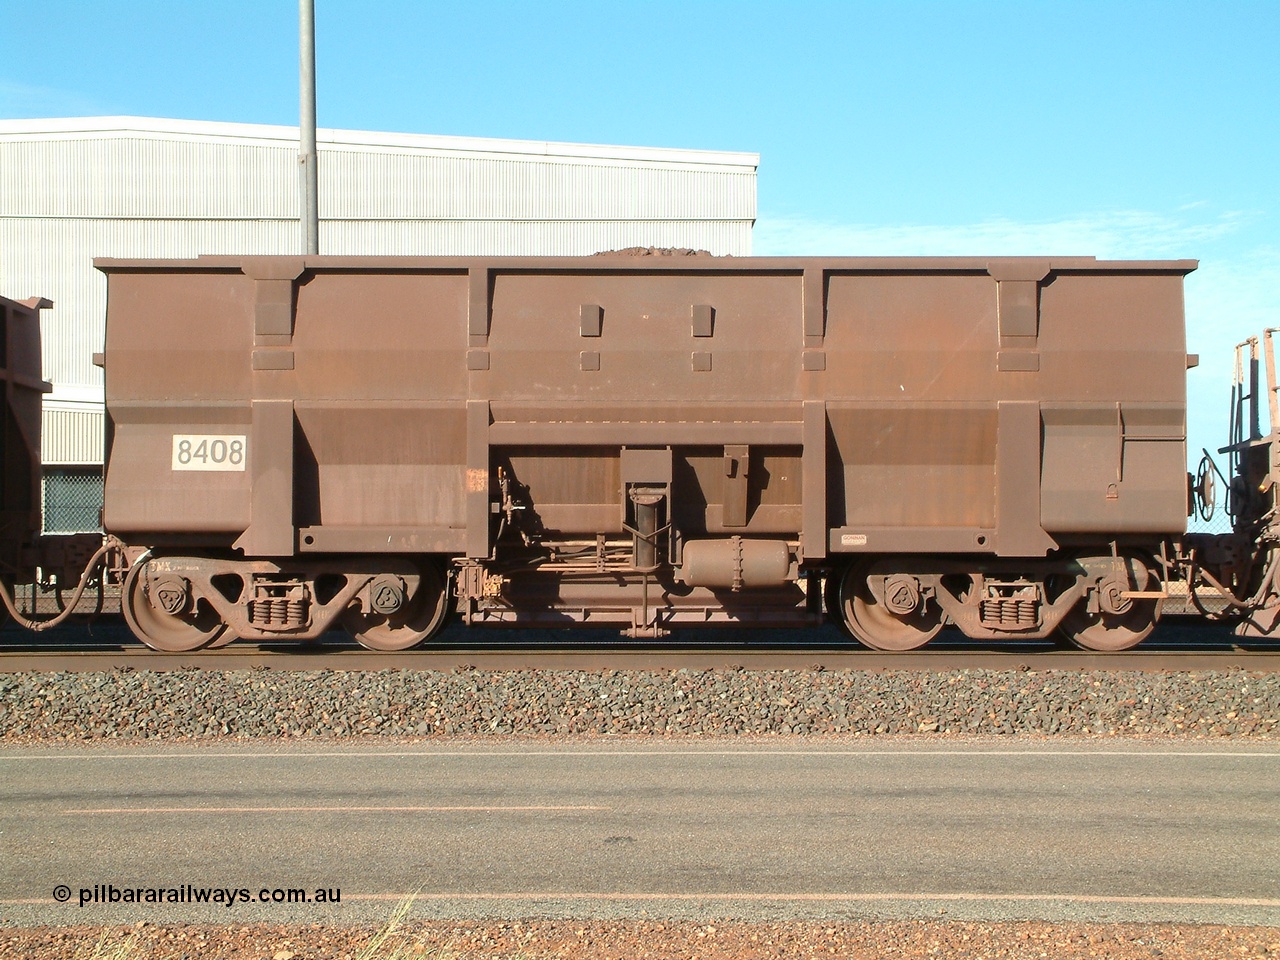 040502 080108
Boodarie, Goninan built Golynx waggon 8408 which is a modified version of the BHP mainline waggons for service on the Goldsworthy system as a bottom discharge waggon. 2nd May 2004.
Keywords: 8408;Goninan-WA;Golynx;BHP-ore-waggon;